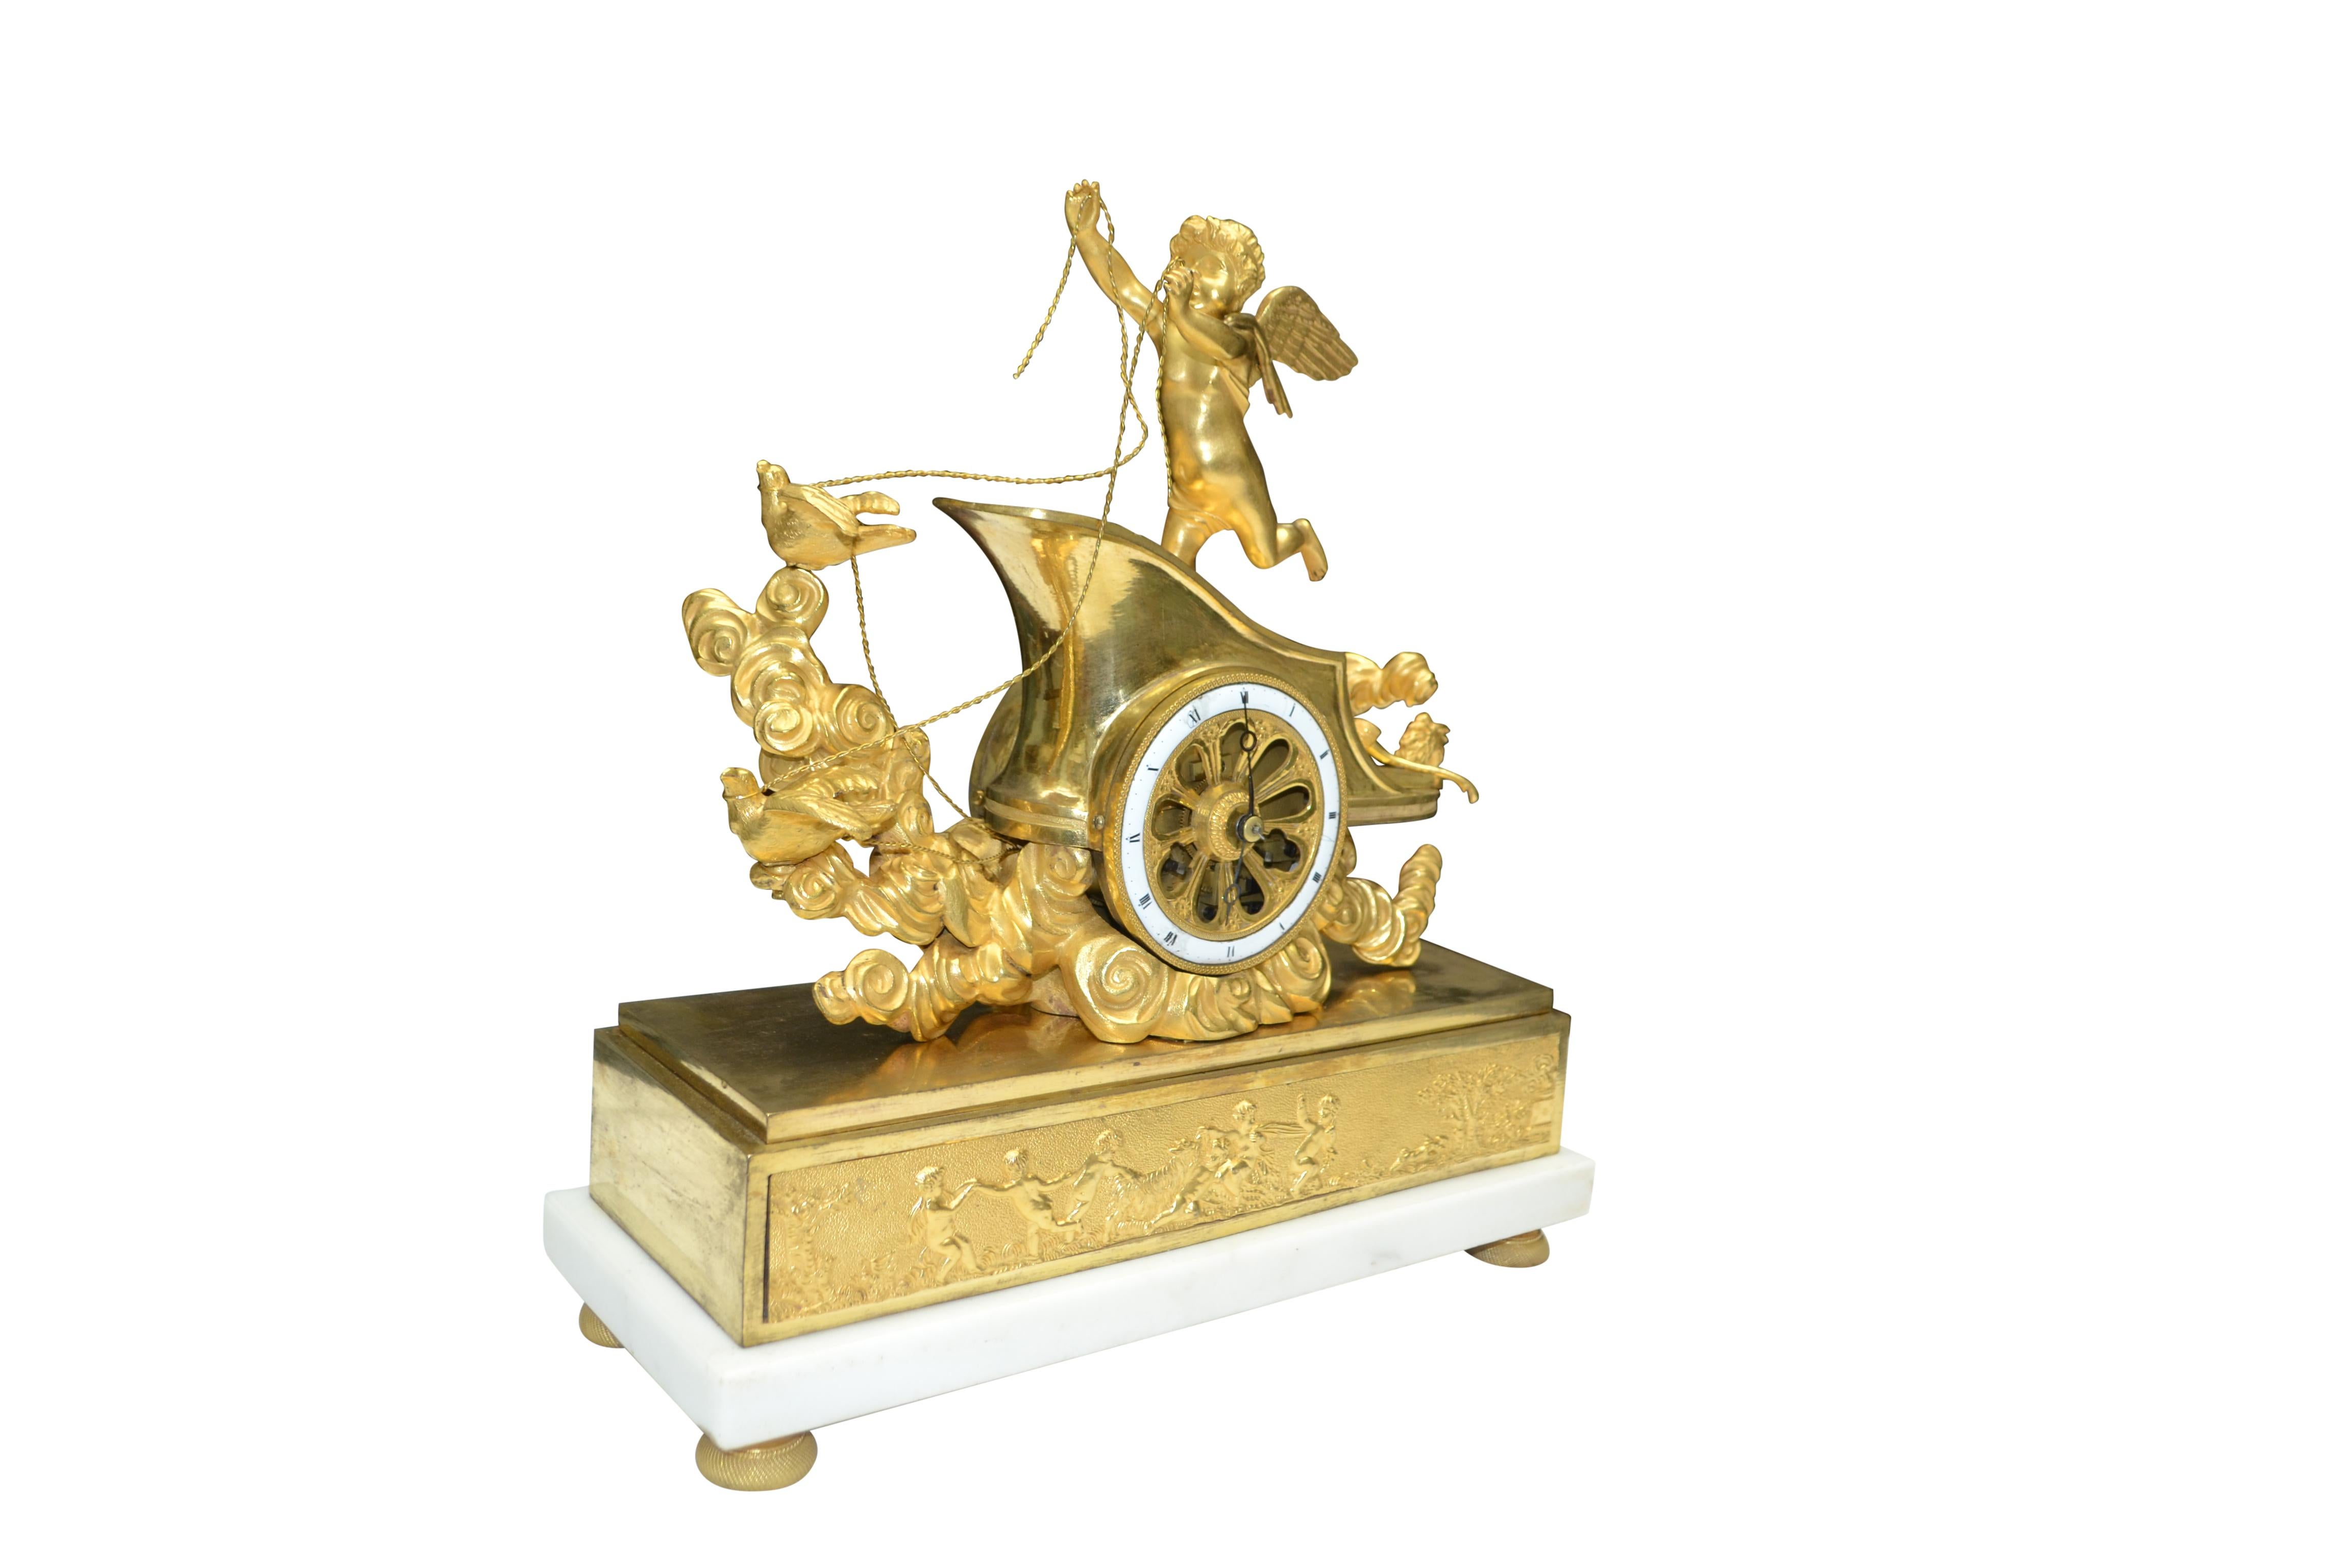 The clock features a winged cupid standing on his chariot drawn by two doves and supported on clouds; cupid holds the reins to two doves which appear to be guiding the chariot. The open 'wheel' of the chariot contains the outer enamel clock dial